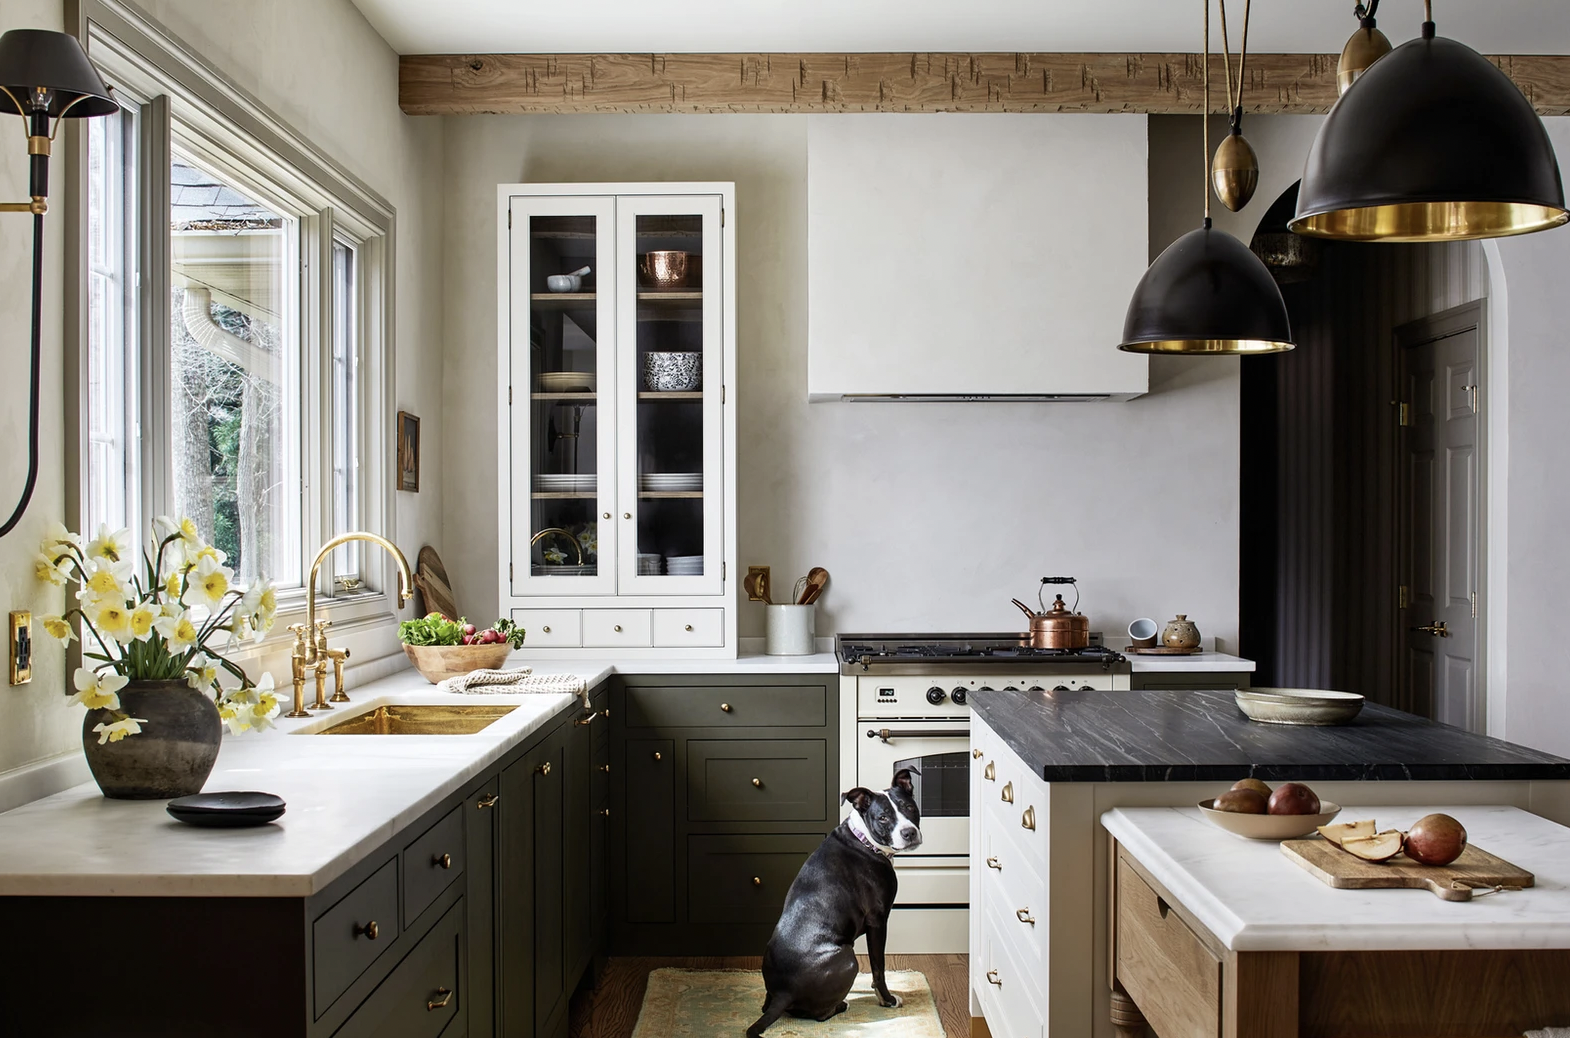 Green cabinets, a creamy white island, contrasting counters and a built-in prep station keep Tanya Smith-Shiflett's personal kitchen fresh and modern. Photo: Stacy Zarin Goldberg